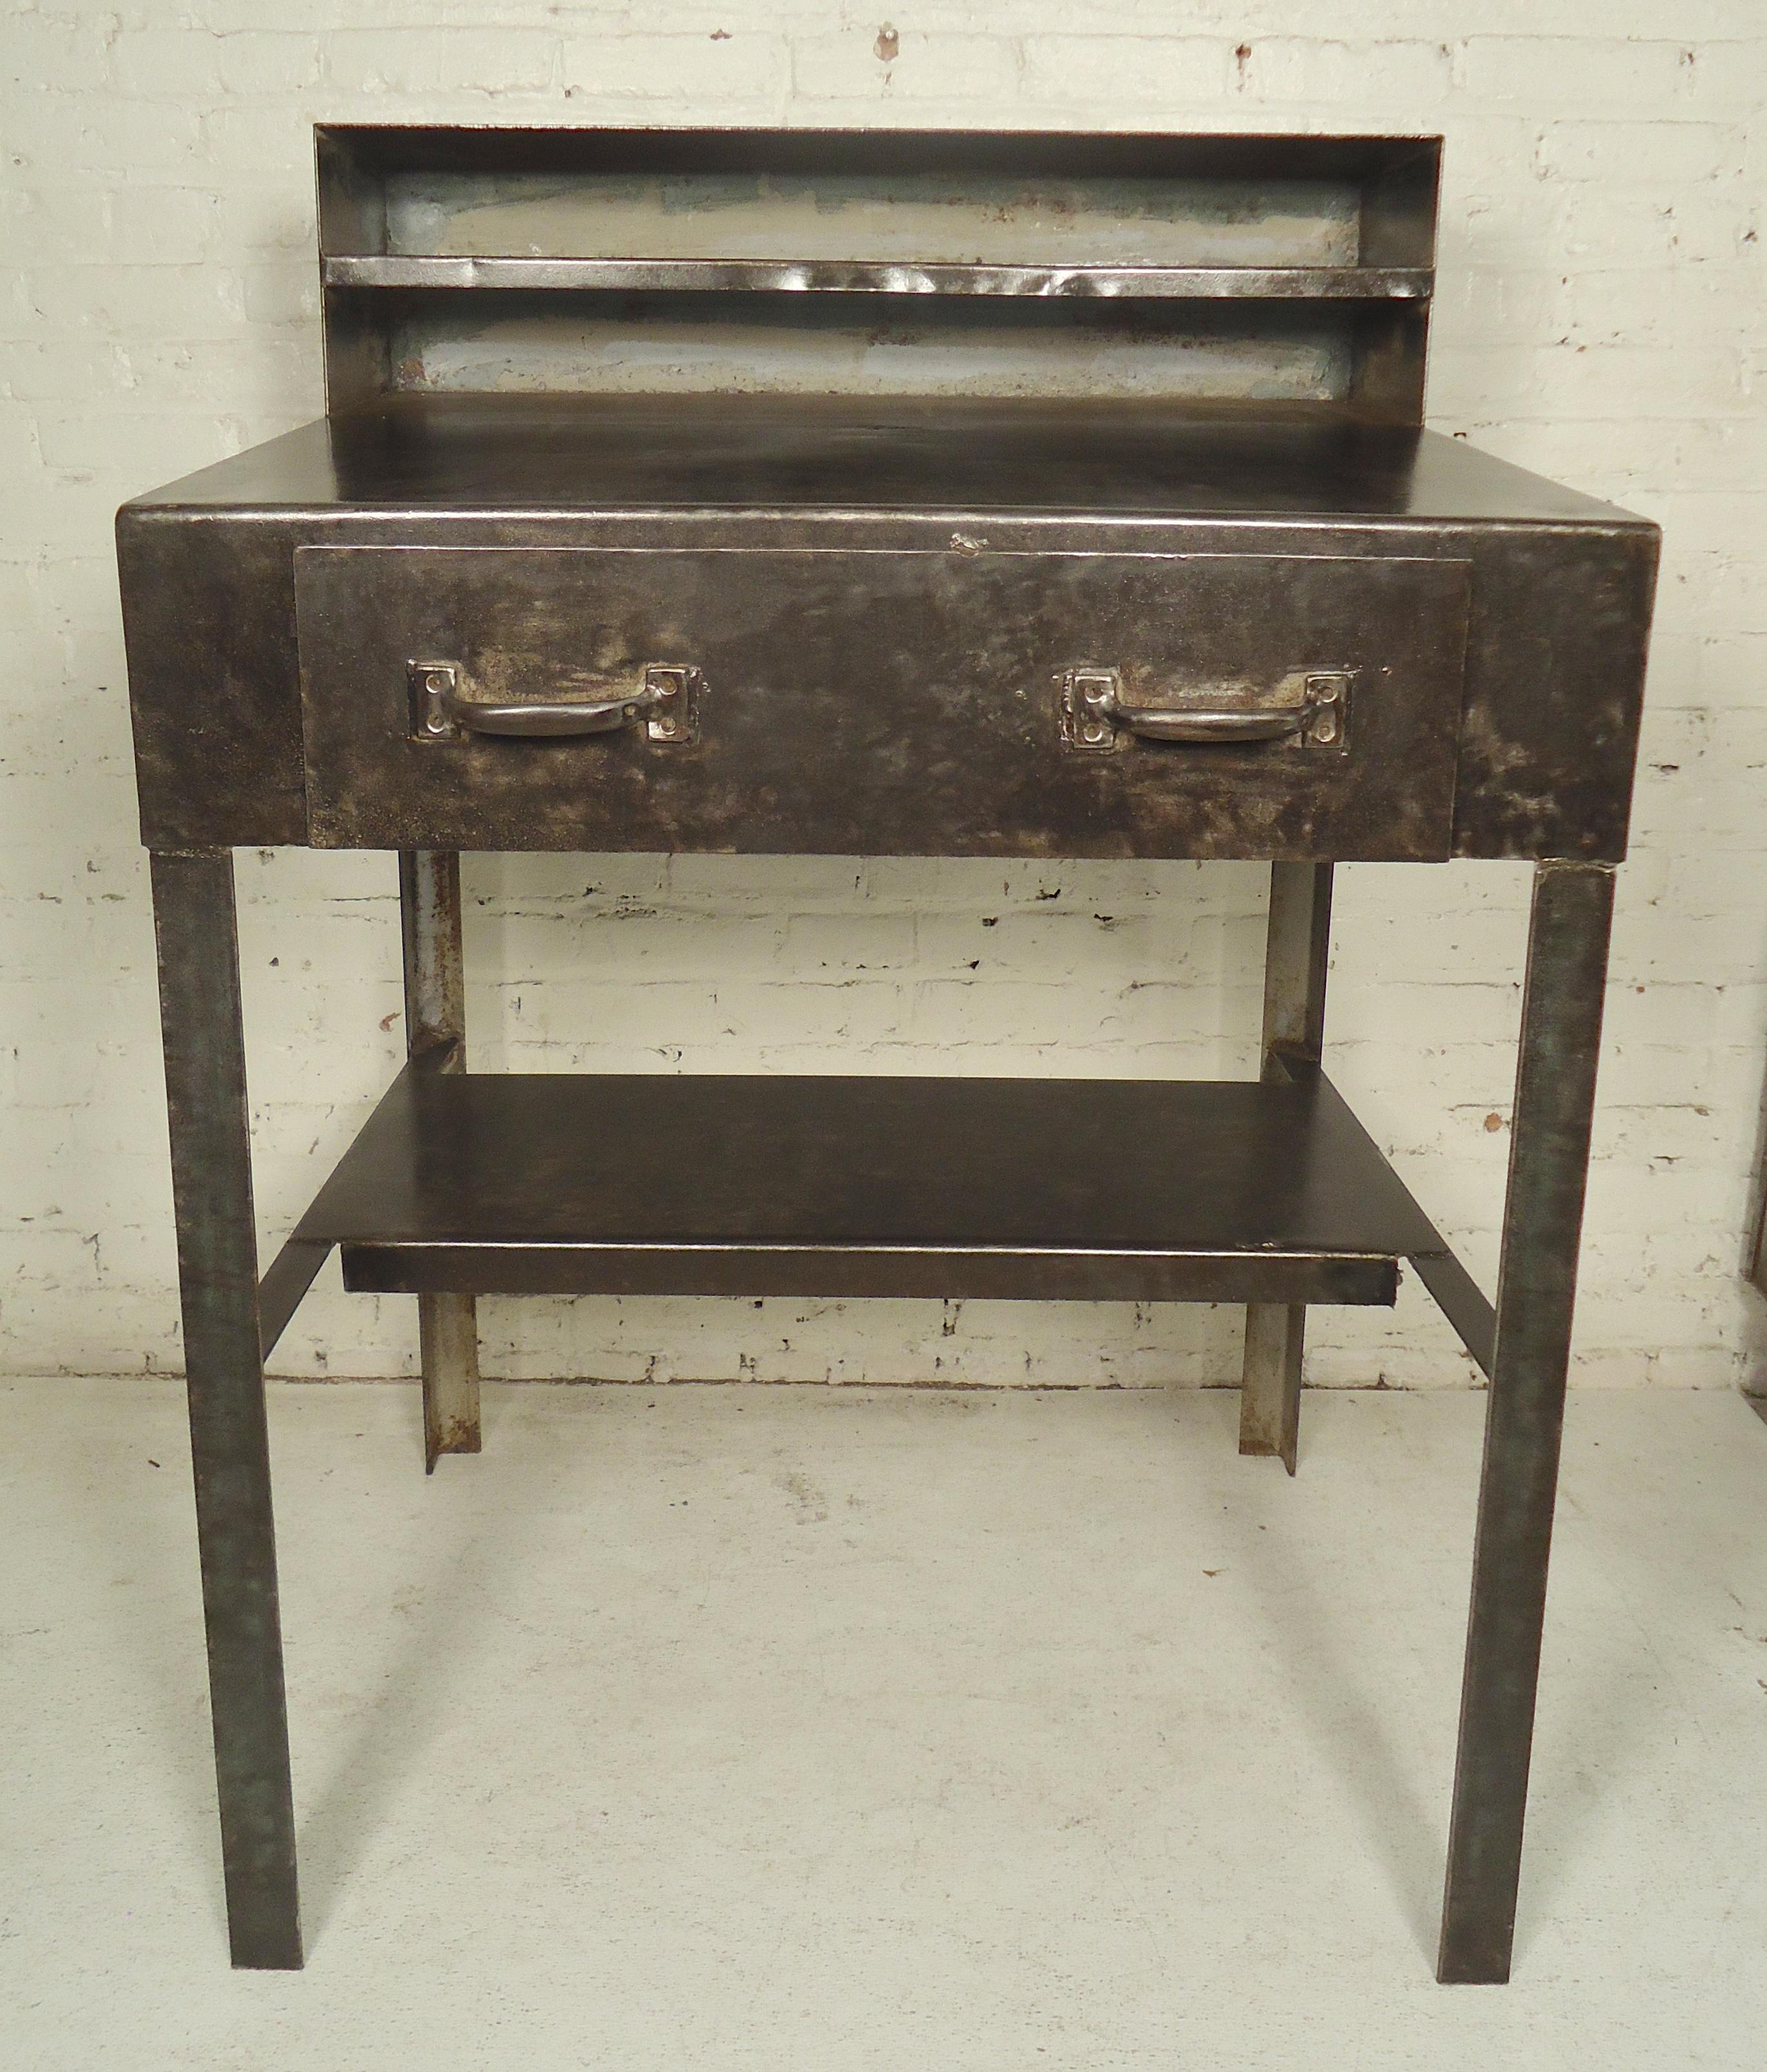 Heavy duty metal desk with slanting top, perfect for bar or restaurant use. Restored in a bare metal style finish.

(Please confirm item location - NY or NJ - with dealer)
    